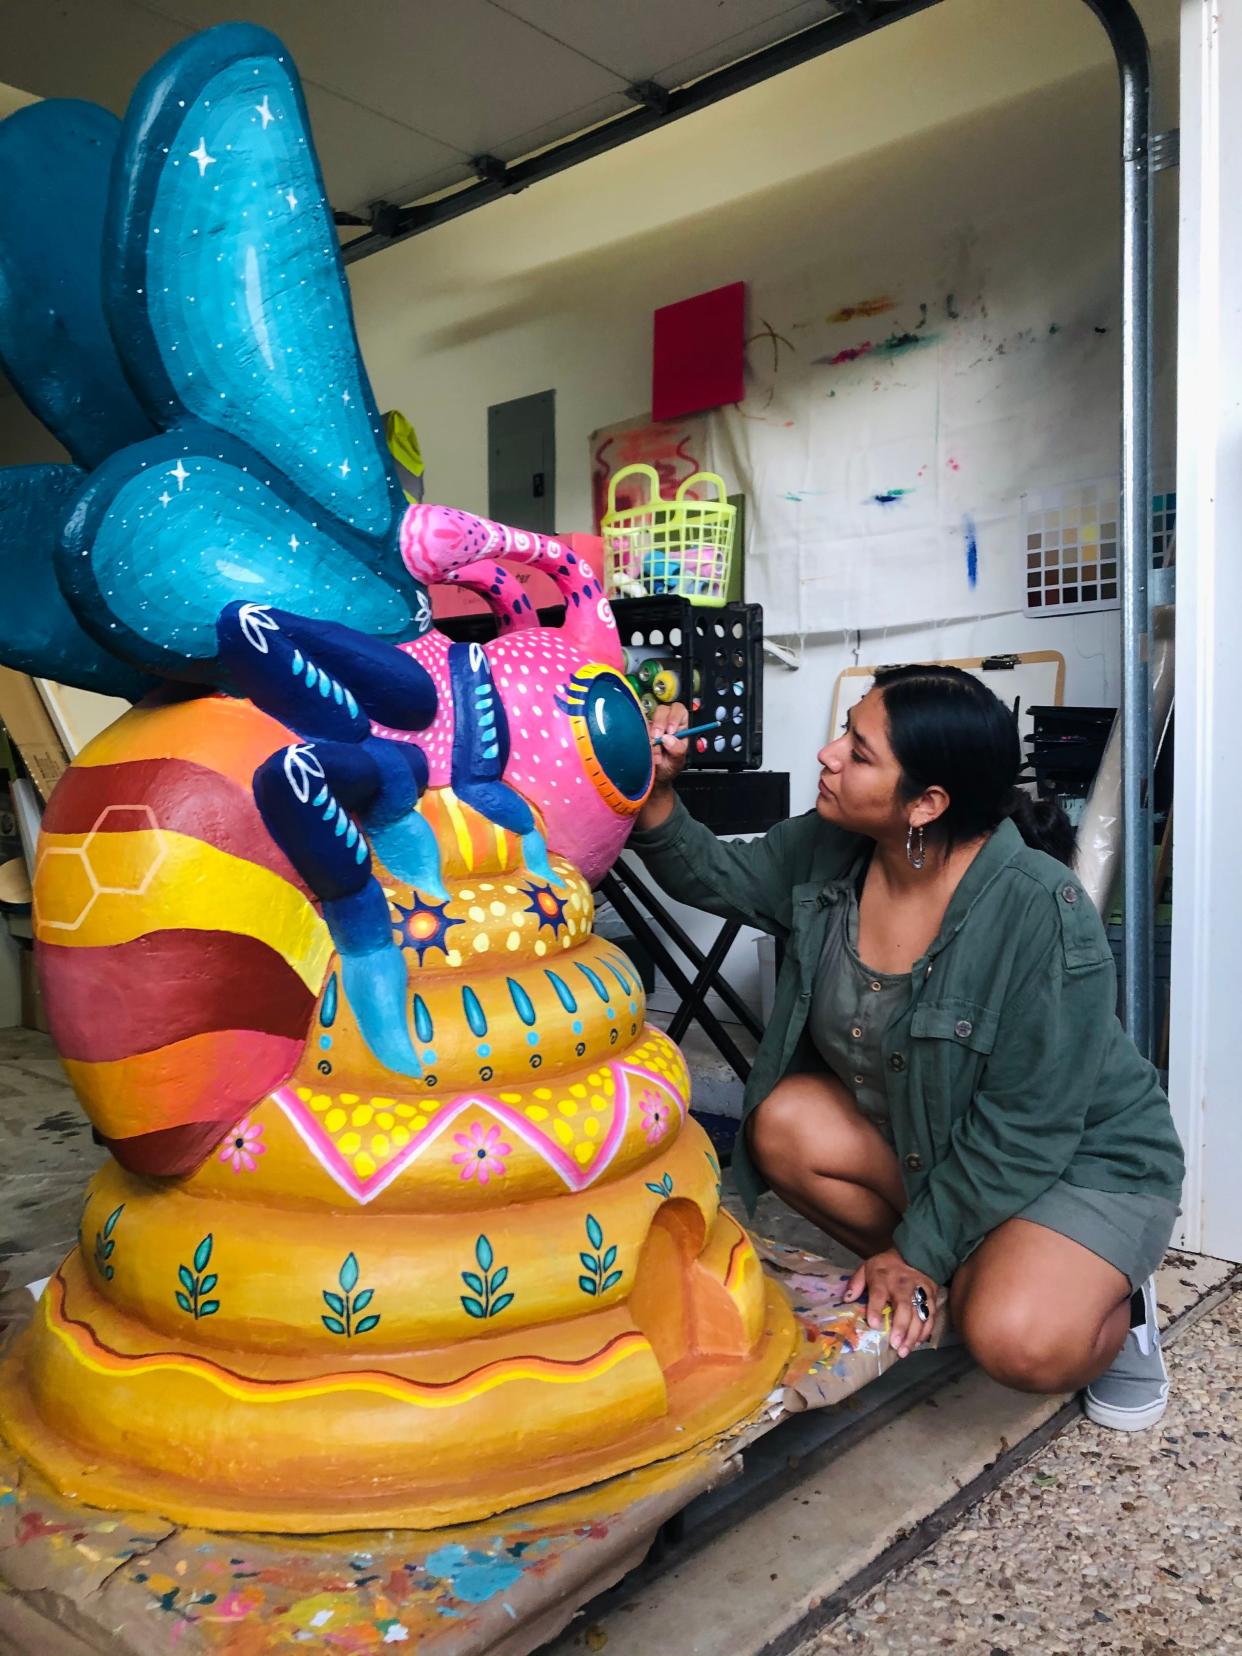 Carmen Rangel, a visual artist in Austin, said she wanted to incorporate elements of Mexican folk art and the bright colors that define her work into her bee statue. The statue is called 'Four Elements.'